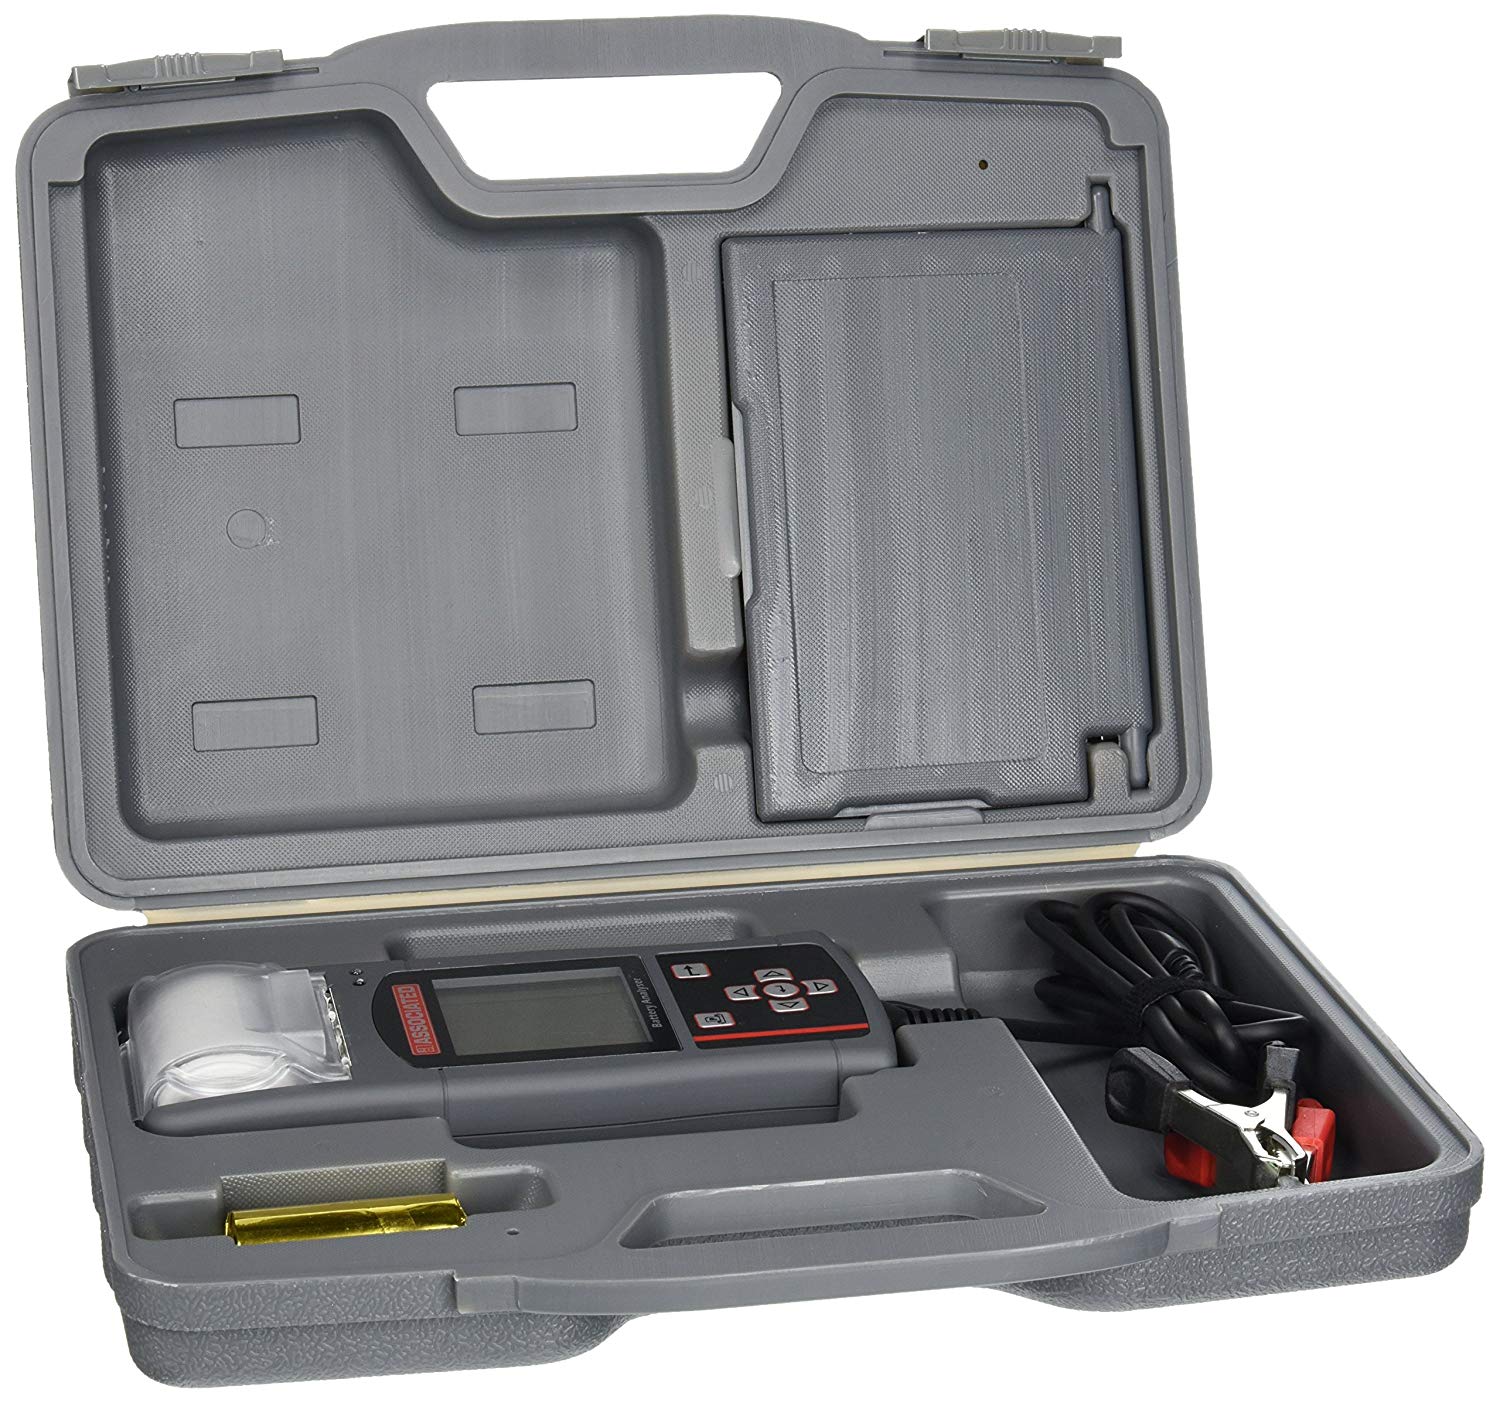 Associated Equipment 12-1015 Hand Held Digital Battery-Electrical System Tester (W/Printer. USB Printer Cable. Software Cd) - MPR Tools & Equipment